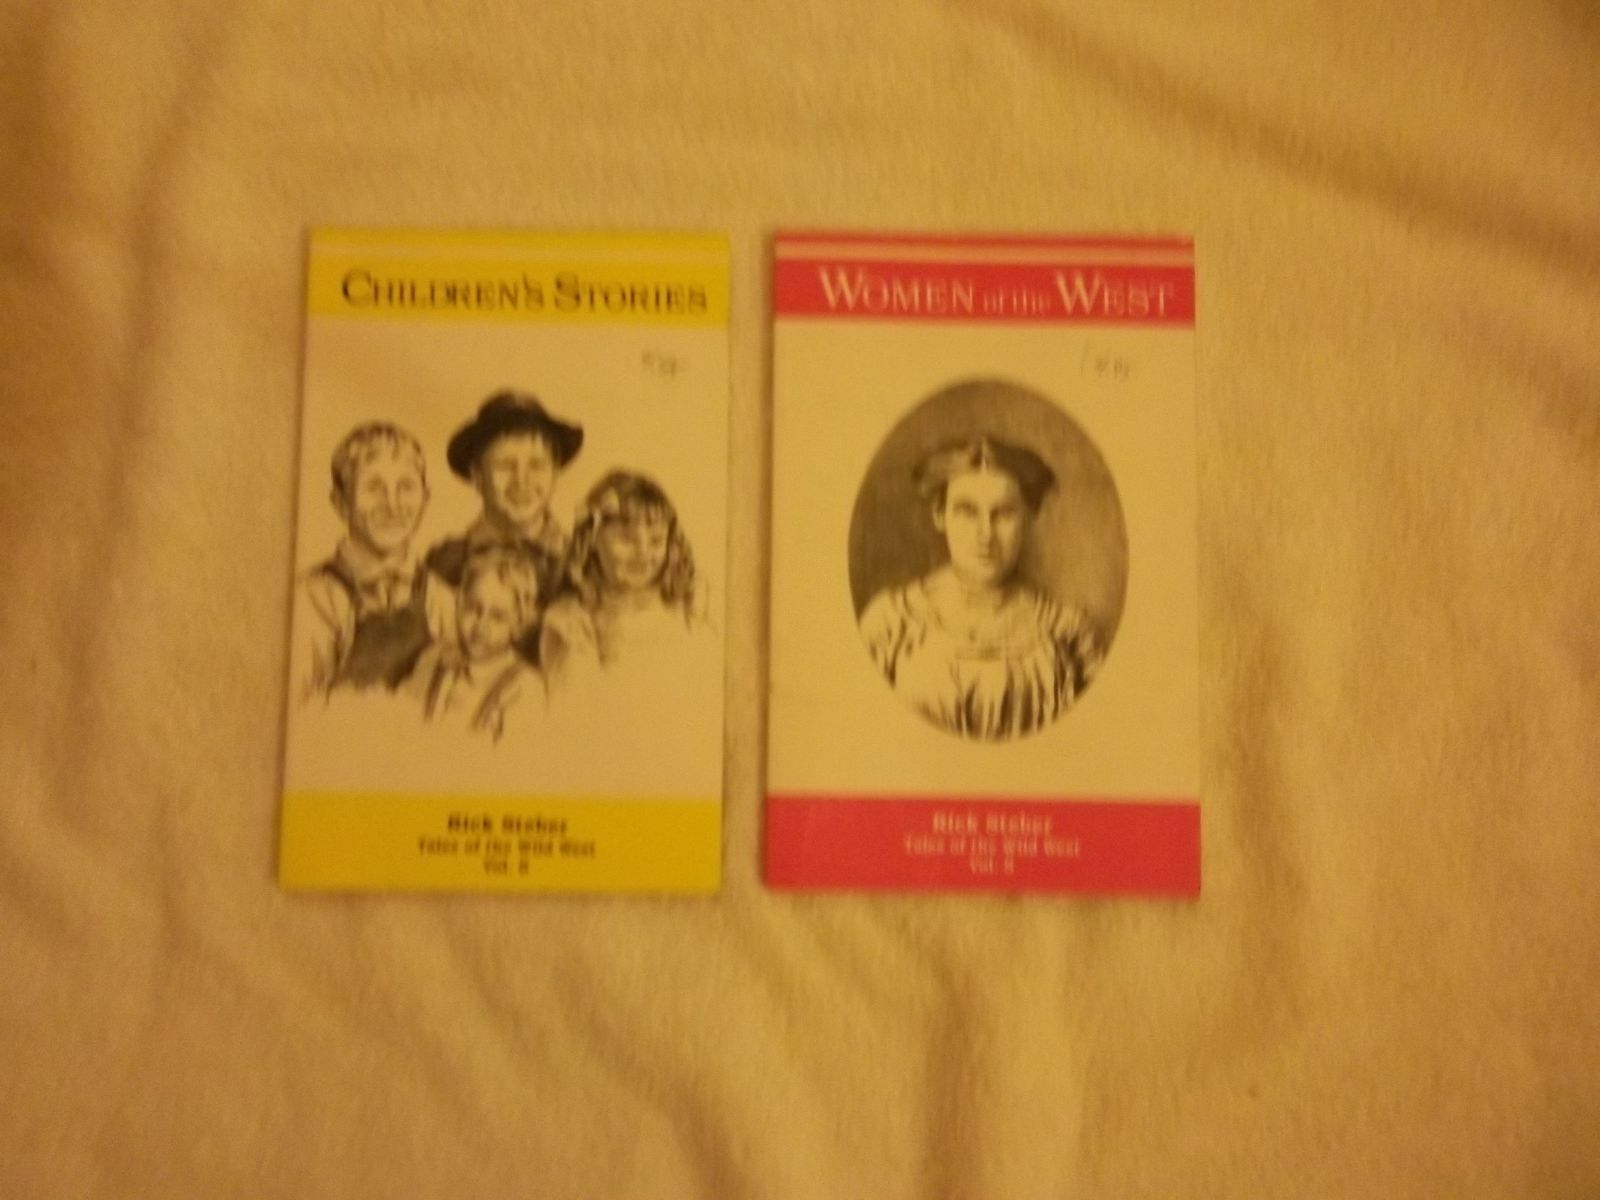 CHILDREN'S STORIES &WOMEN 2 BOOKS TALES OF THE WEST PAPERBACK) BY RICK STEBER